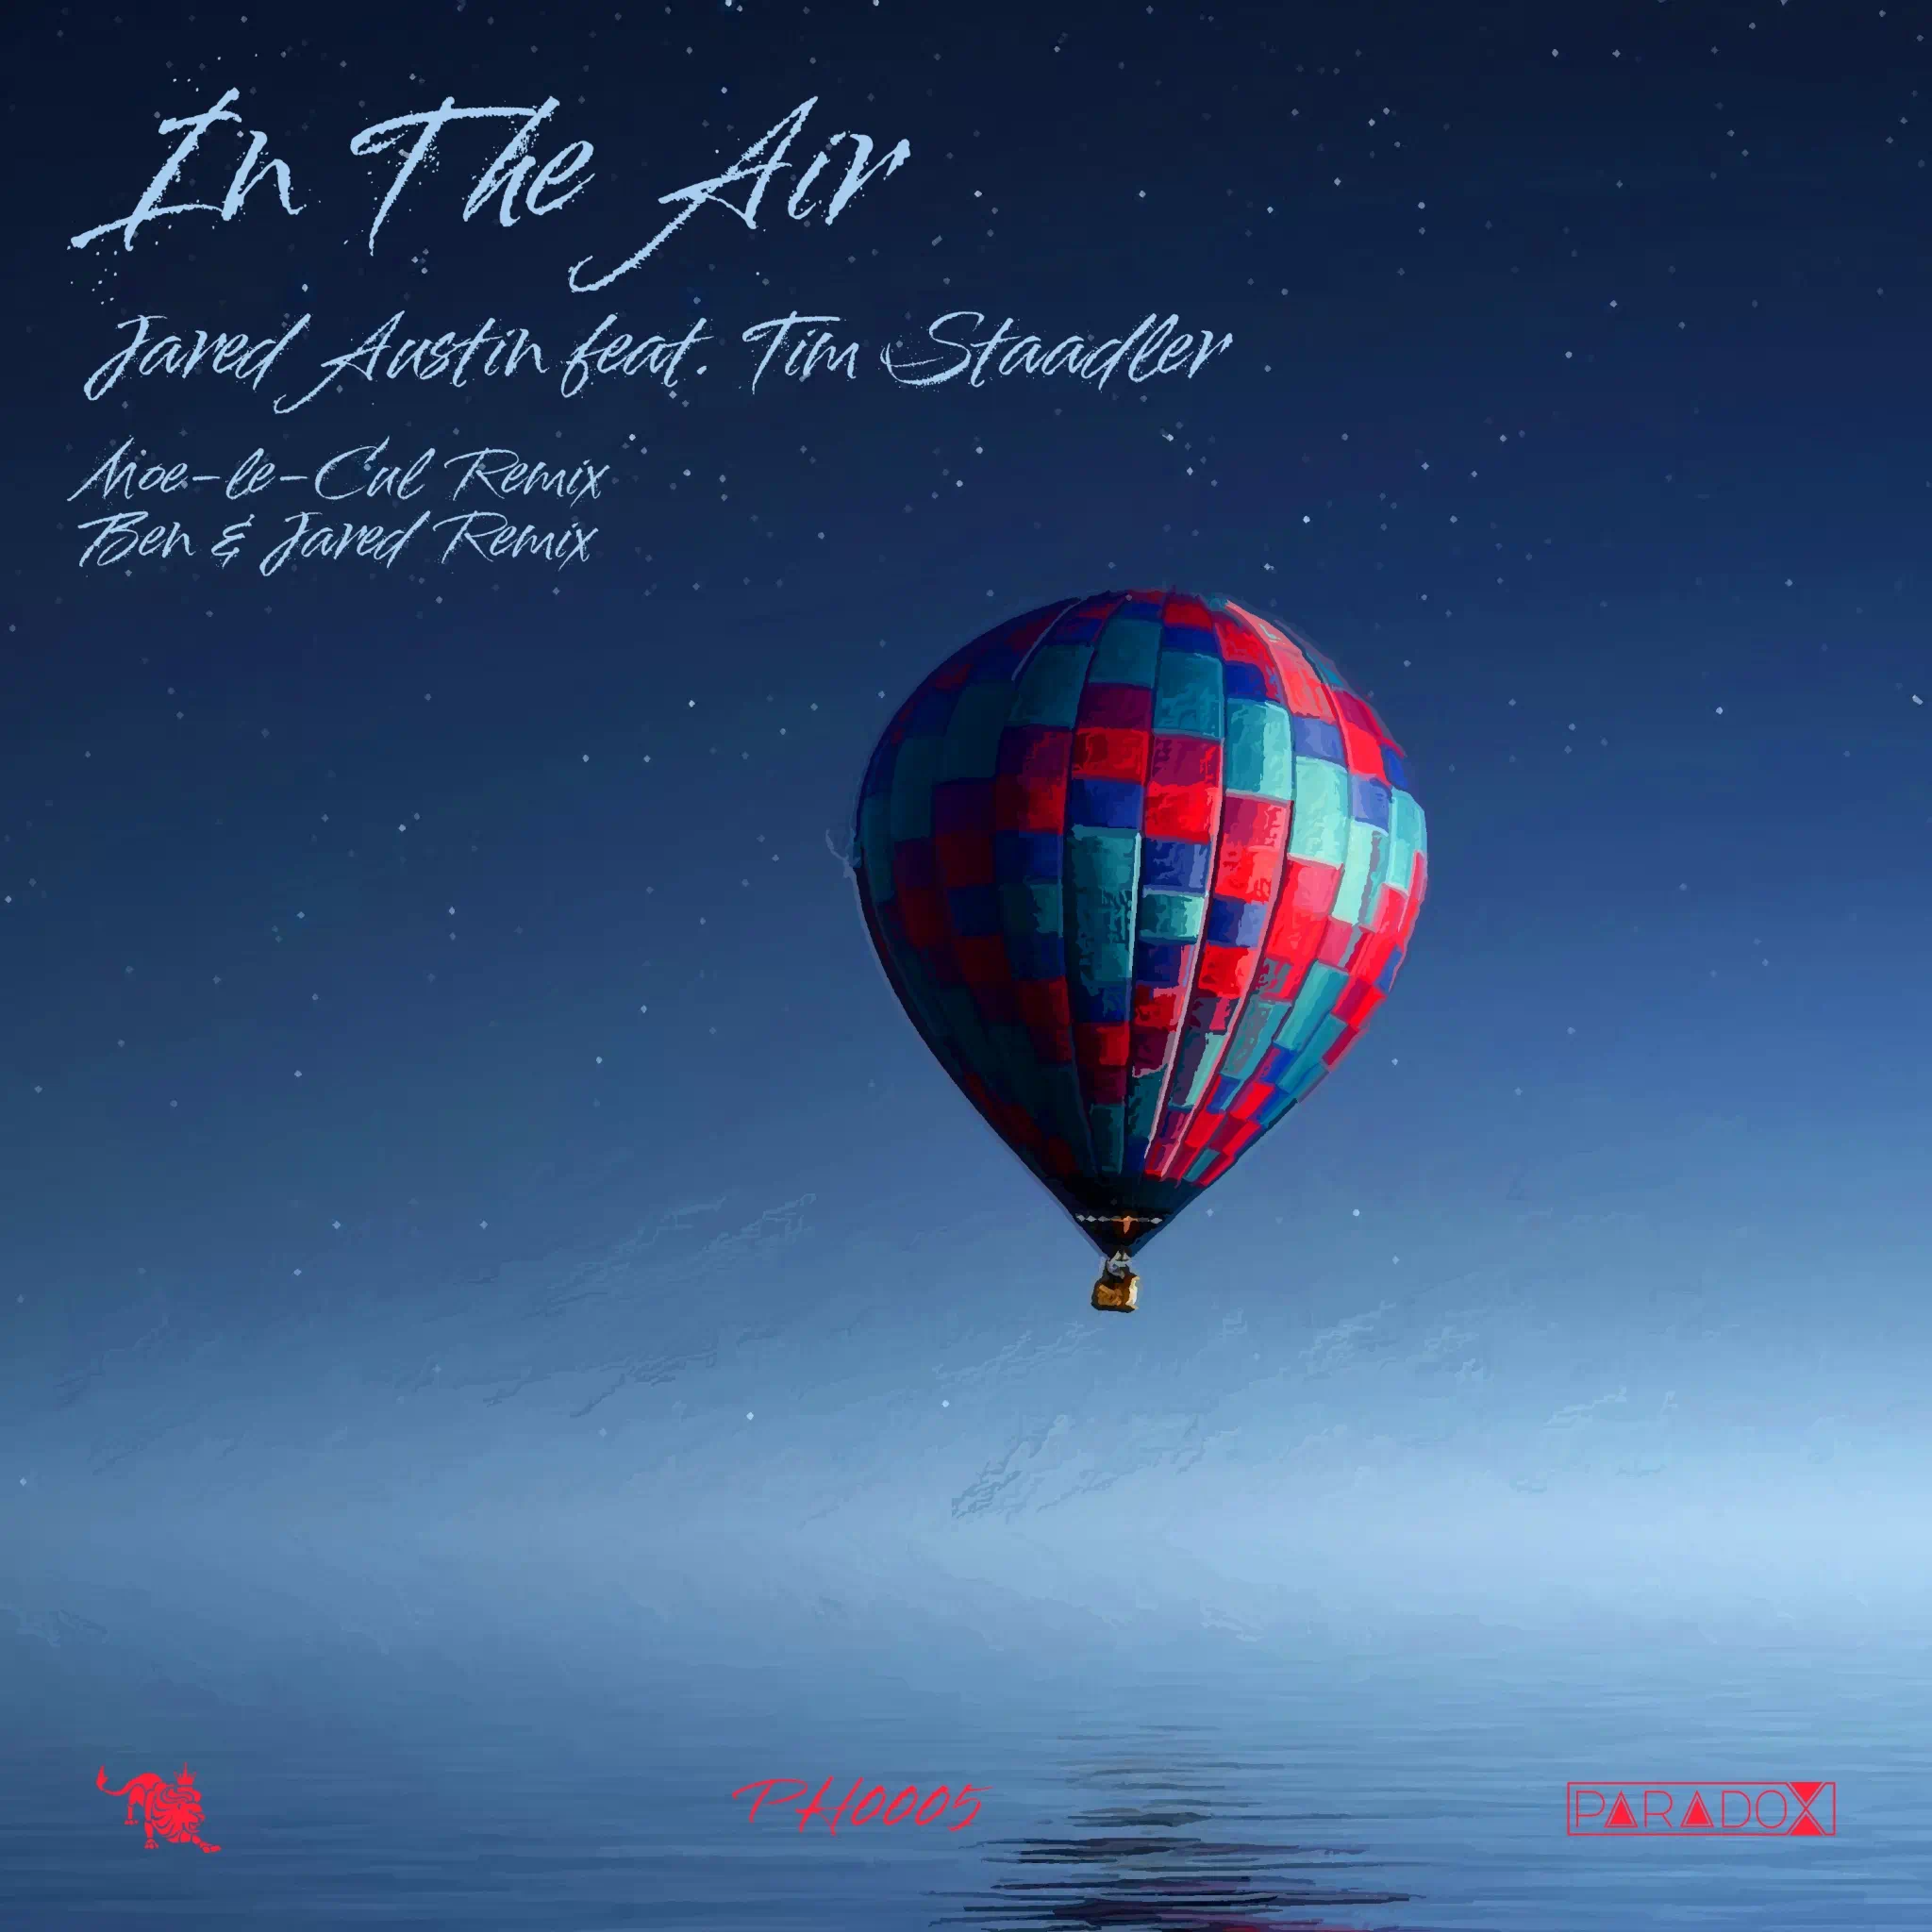 Jared Austin feat. Tim Staadler - In The Air